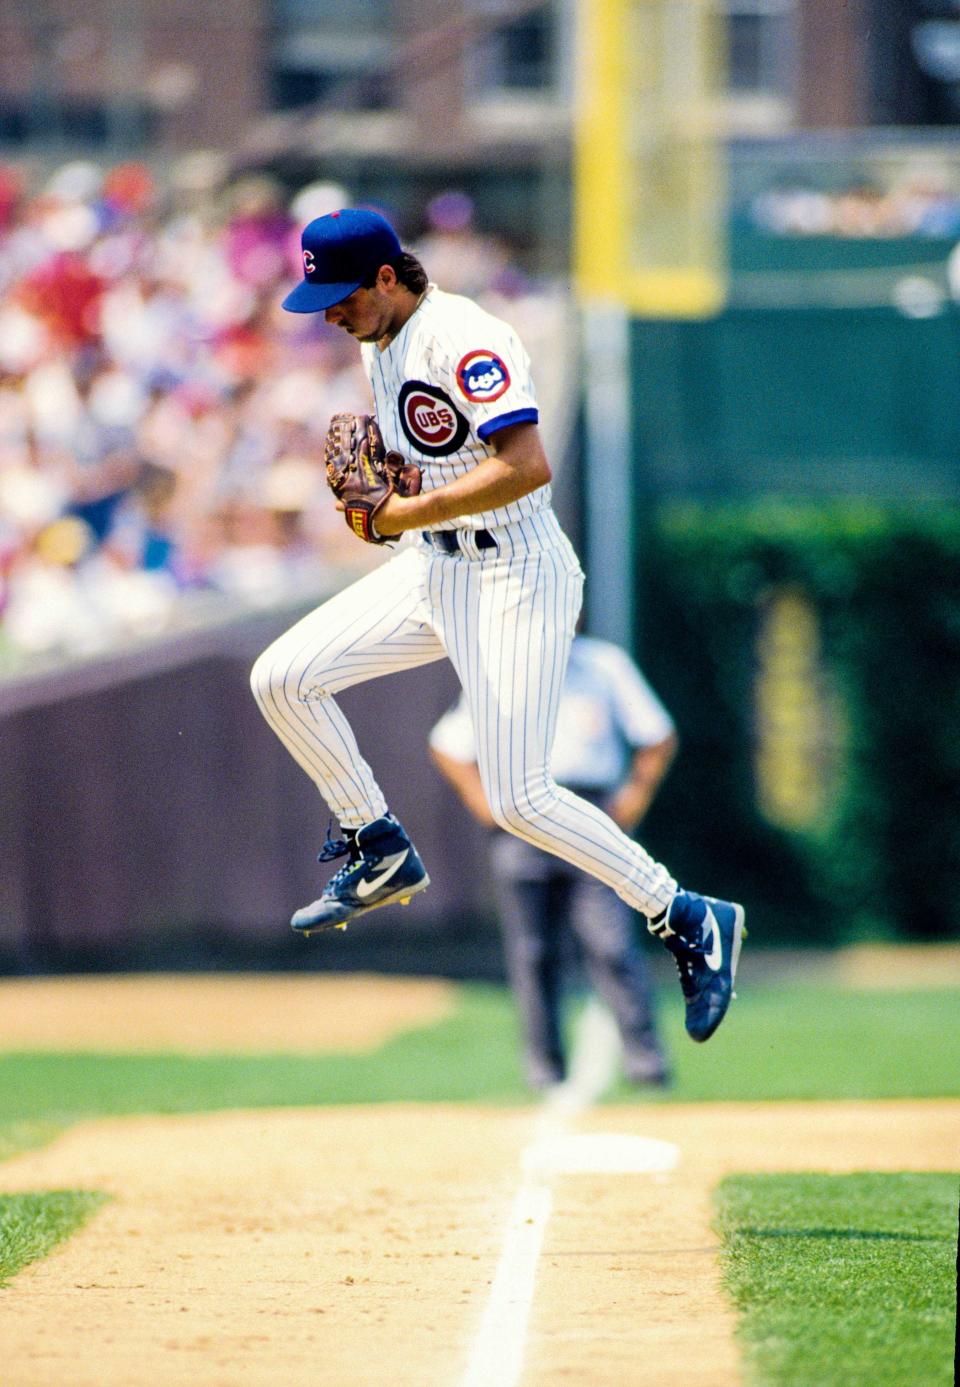 Former Iowa Cubs pitcher Turk Wendell jumps over the third-base line at Wrigley Field after finishing an inning for the Chicago Cubs.